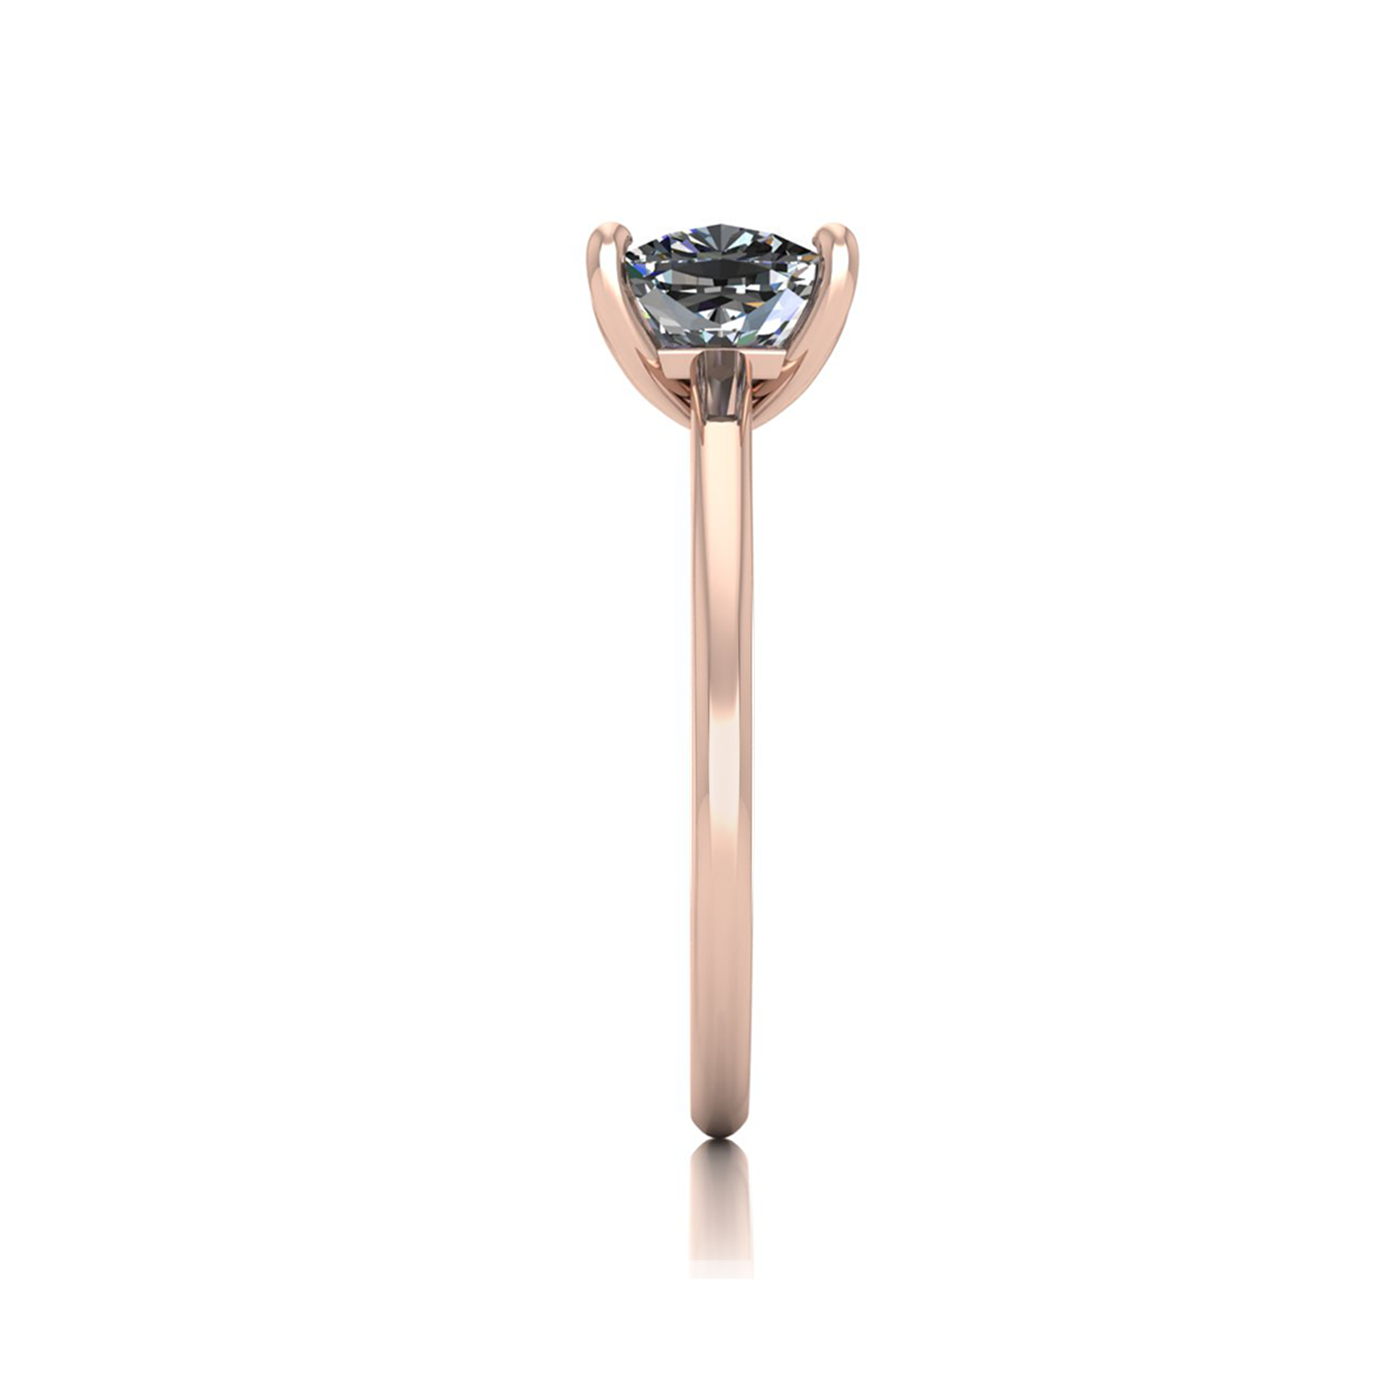 18k rose gold 1.5ct 4 prongs solitaire cushion cut diamond engagement ring with whisper thin band